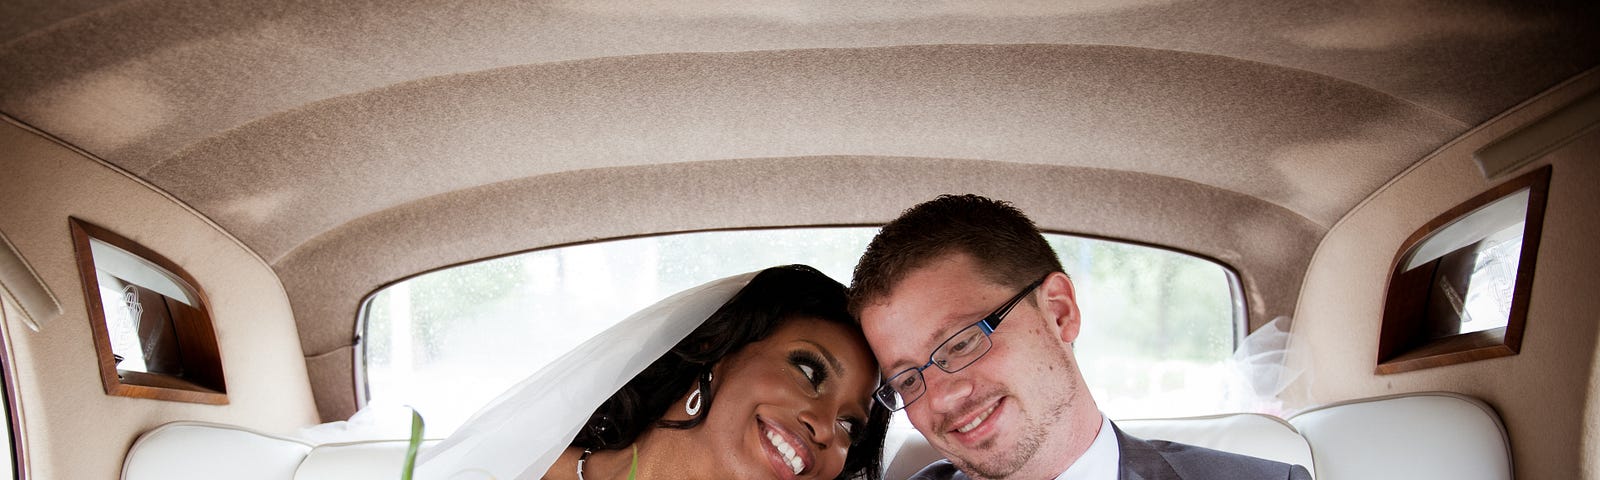 image shows a newly wedded interracial couple in the back of a limo. The female is black and her head is resting on the shoulder of her new husband. The man is leaning towards her with a happy smile on his face.